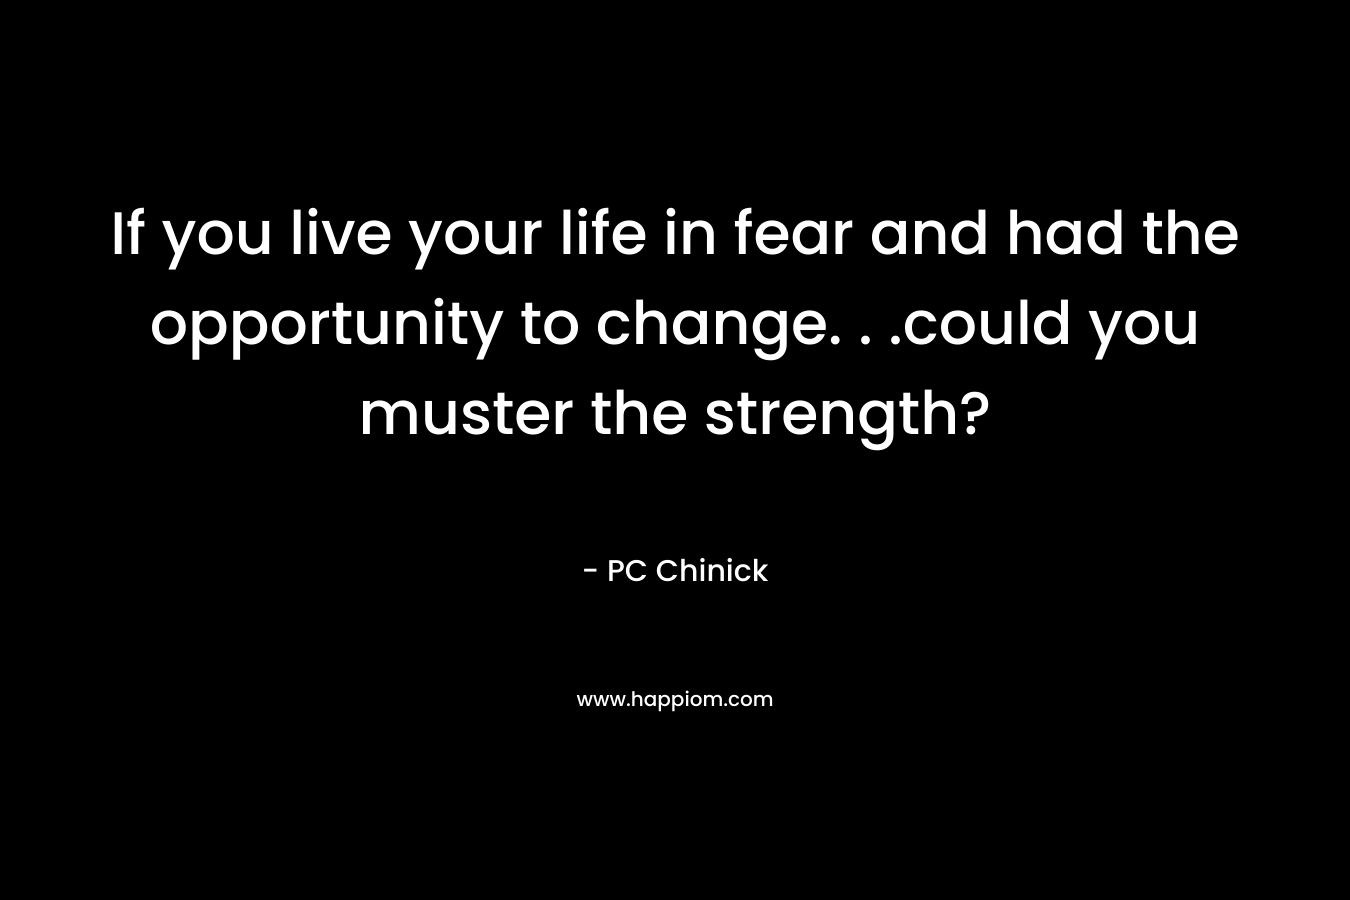 If you live your life in fear and had the opportunity to change. . .could you muster the strength? – PC Chinick